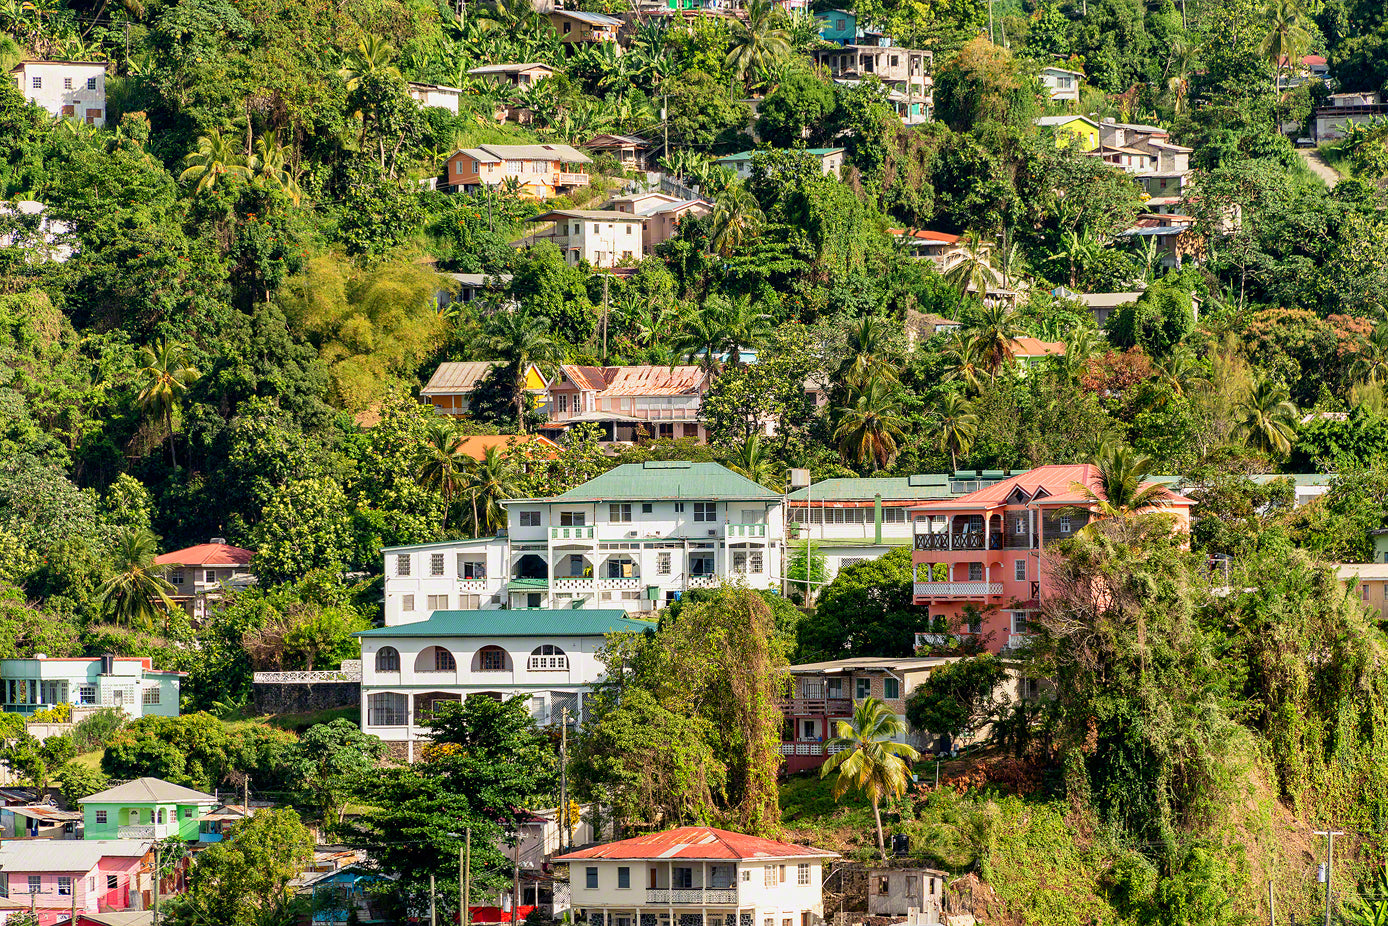 A photo of colorful houses in tropical St. Lucia